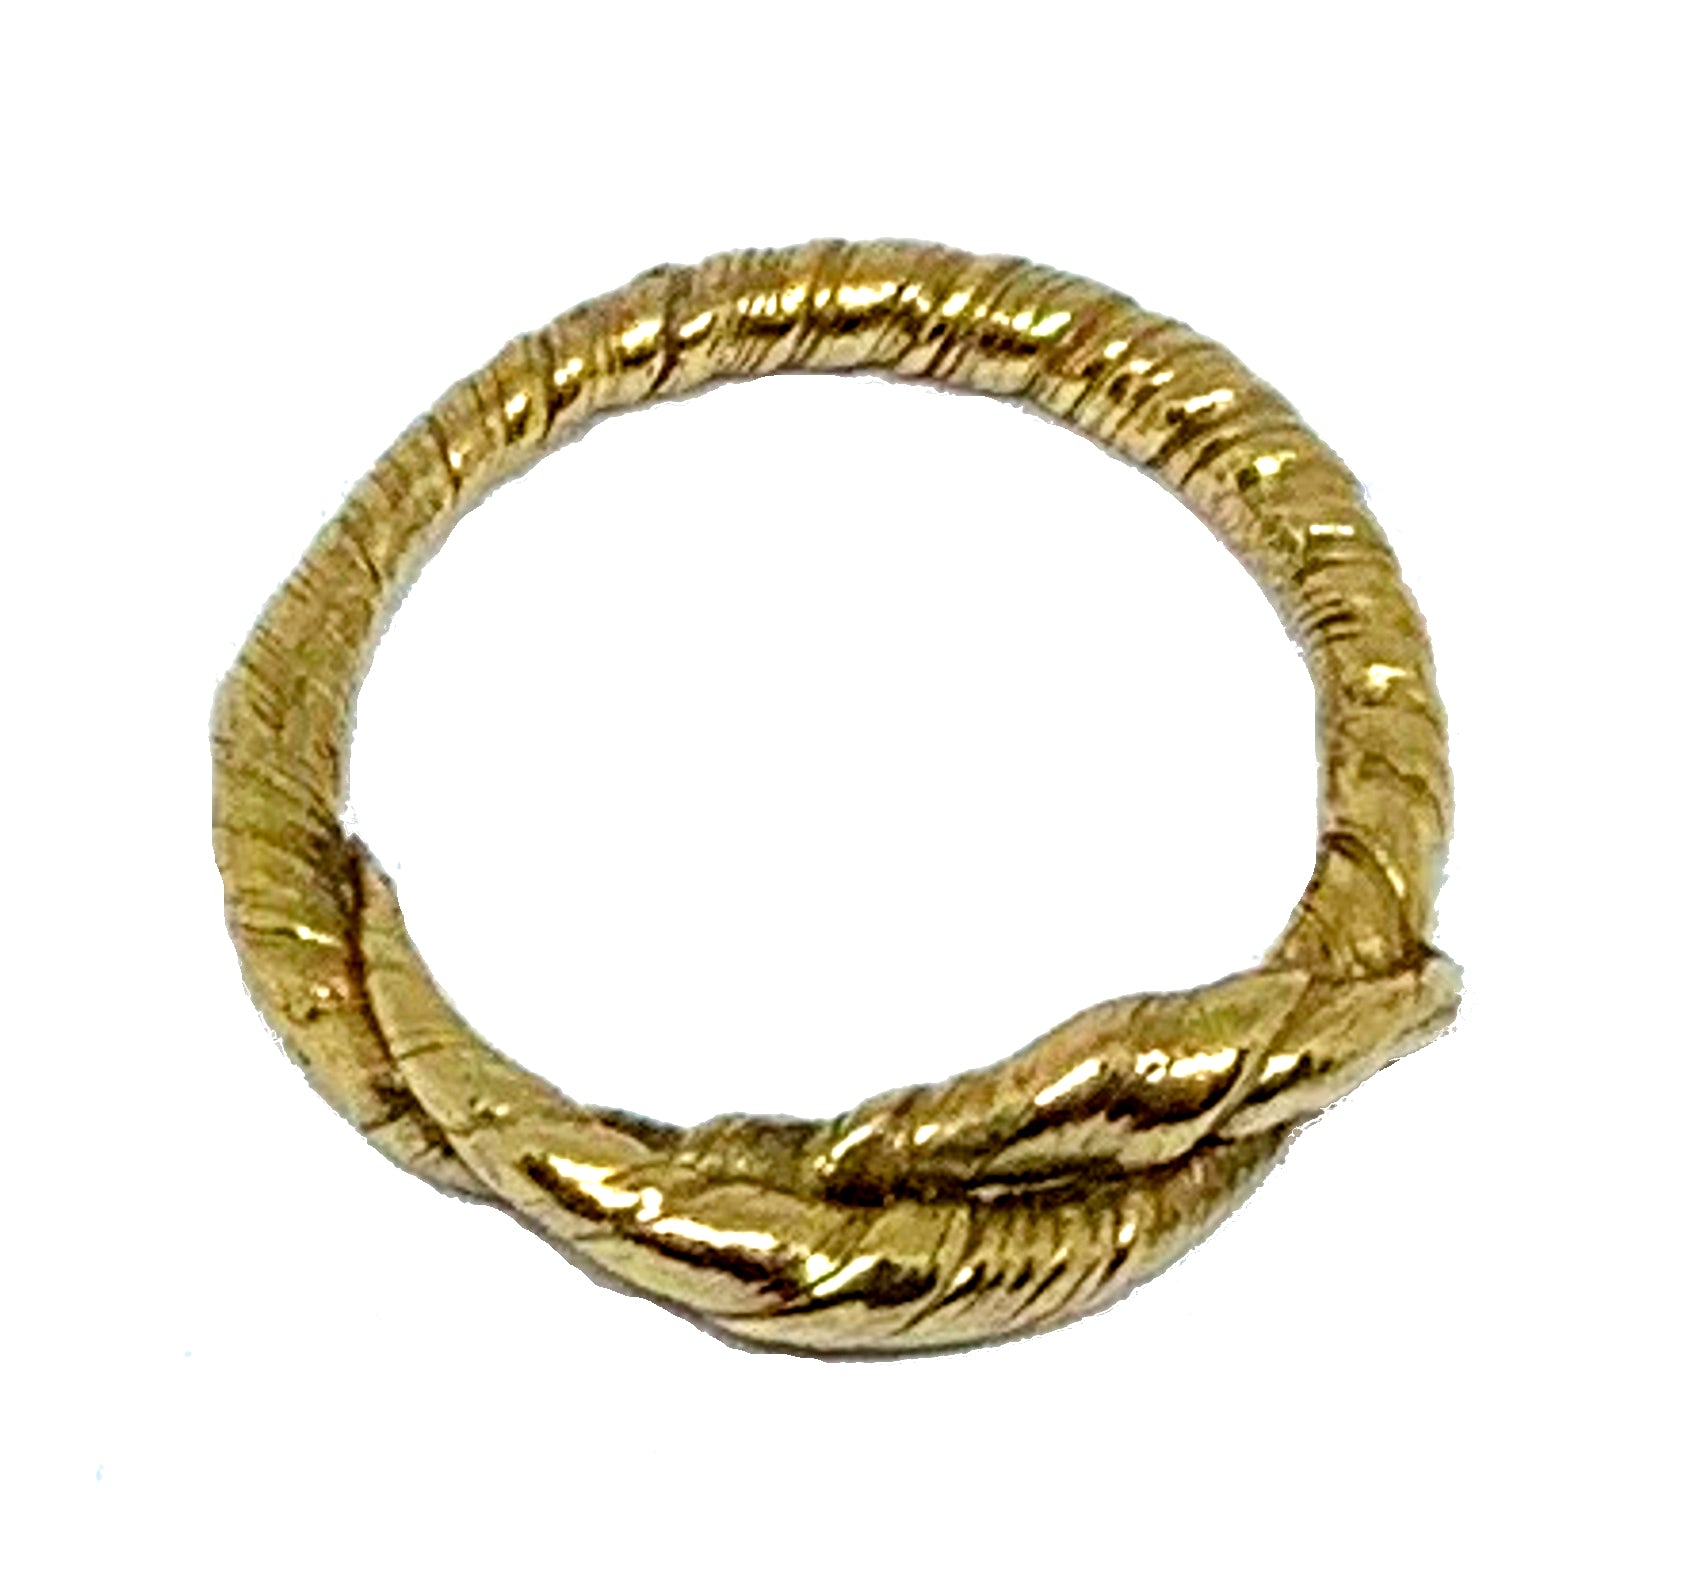 Entwined Vine Ring in 14K Yellow Gold - Mitsuro Hikime